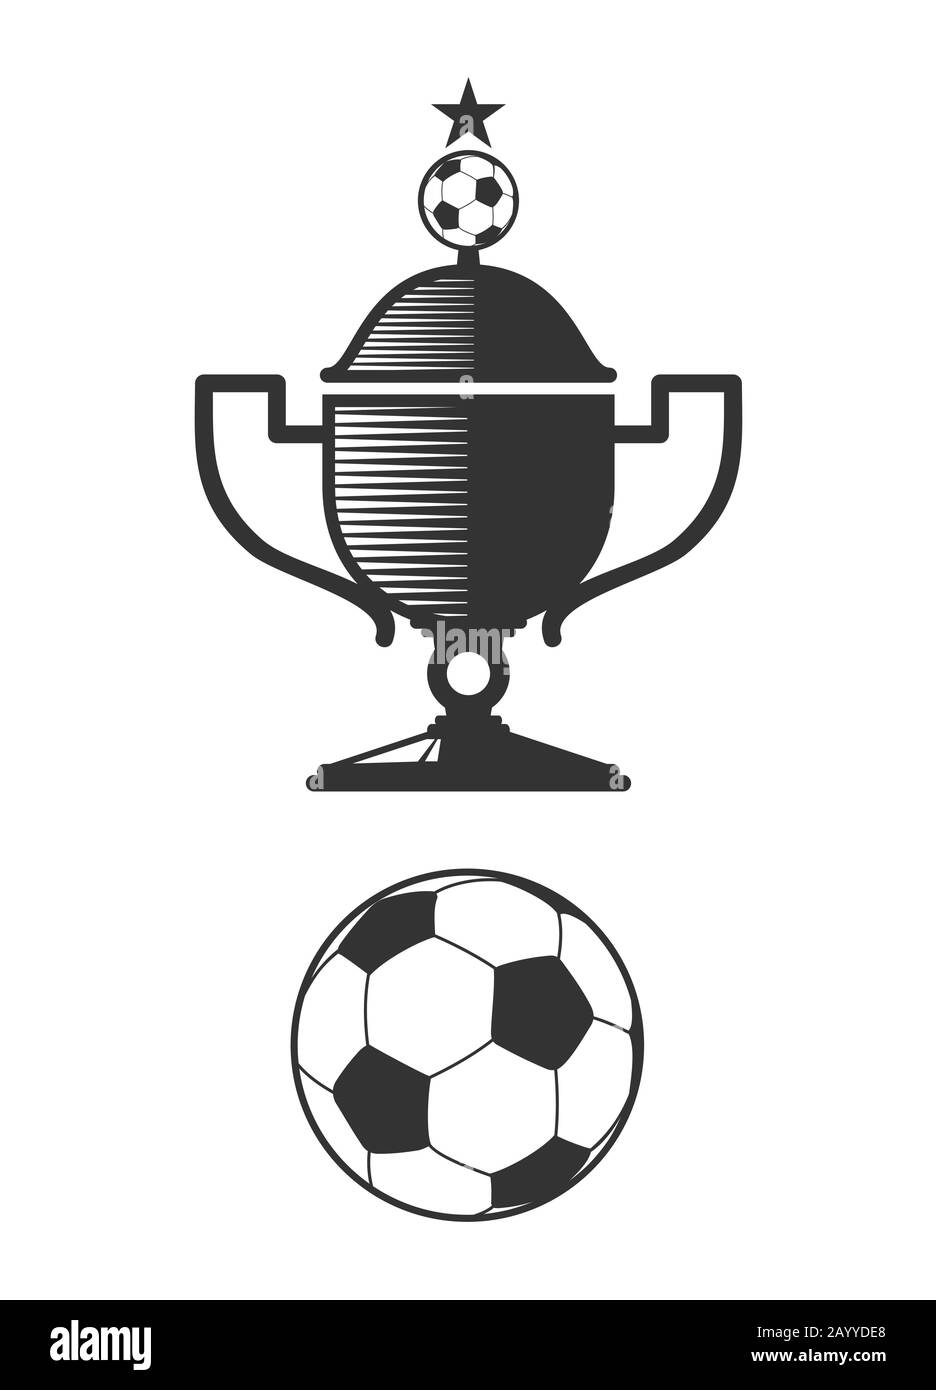 Soccer cup and ball design elements. Football logo for sport team. Vector illustration Stock Vector